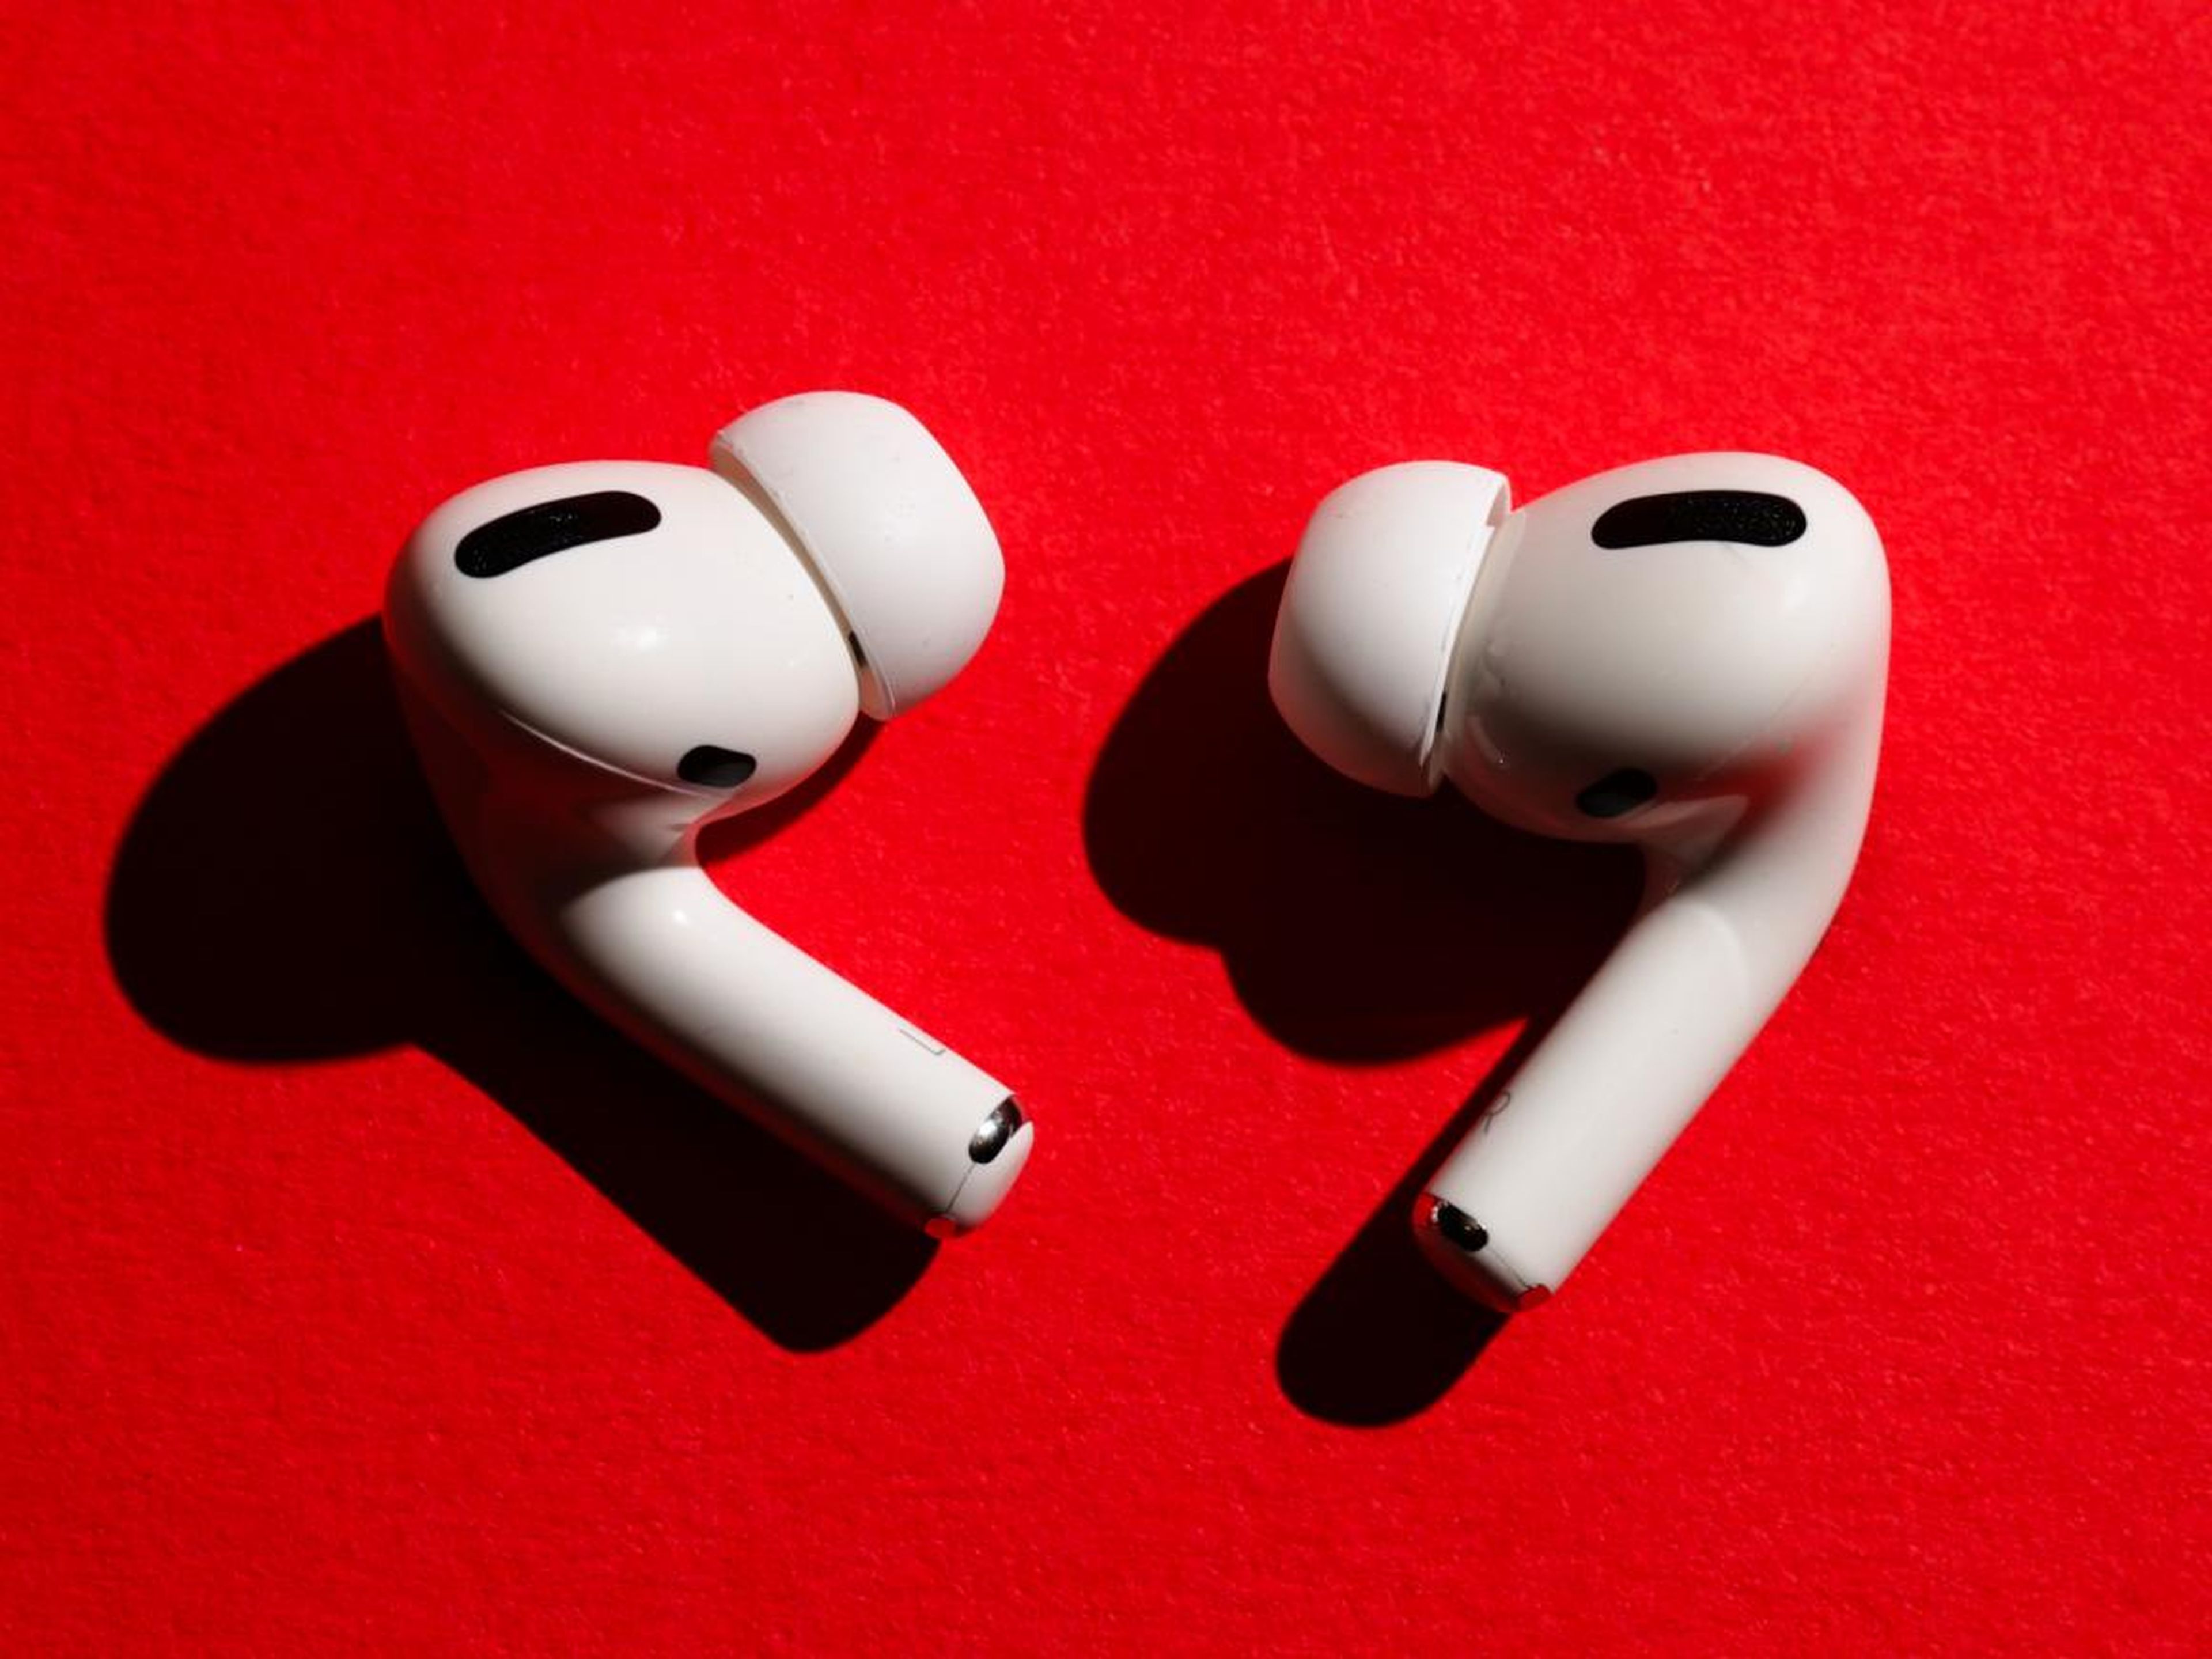 Apple's AirPods had a breakout year in 2019, and it proves that they're slowly becoming one of the company's most important products